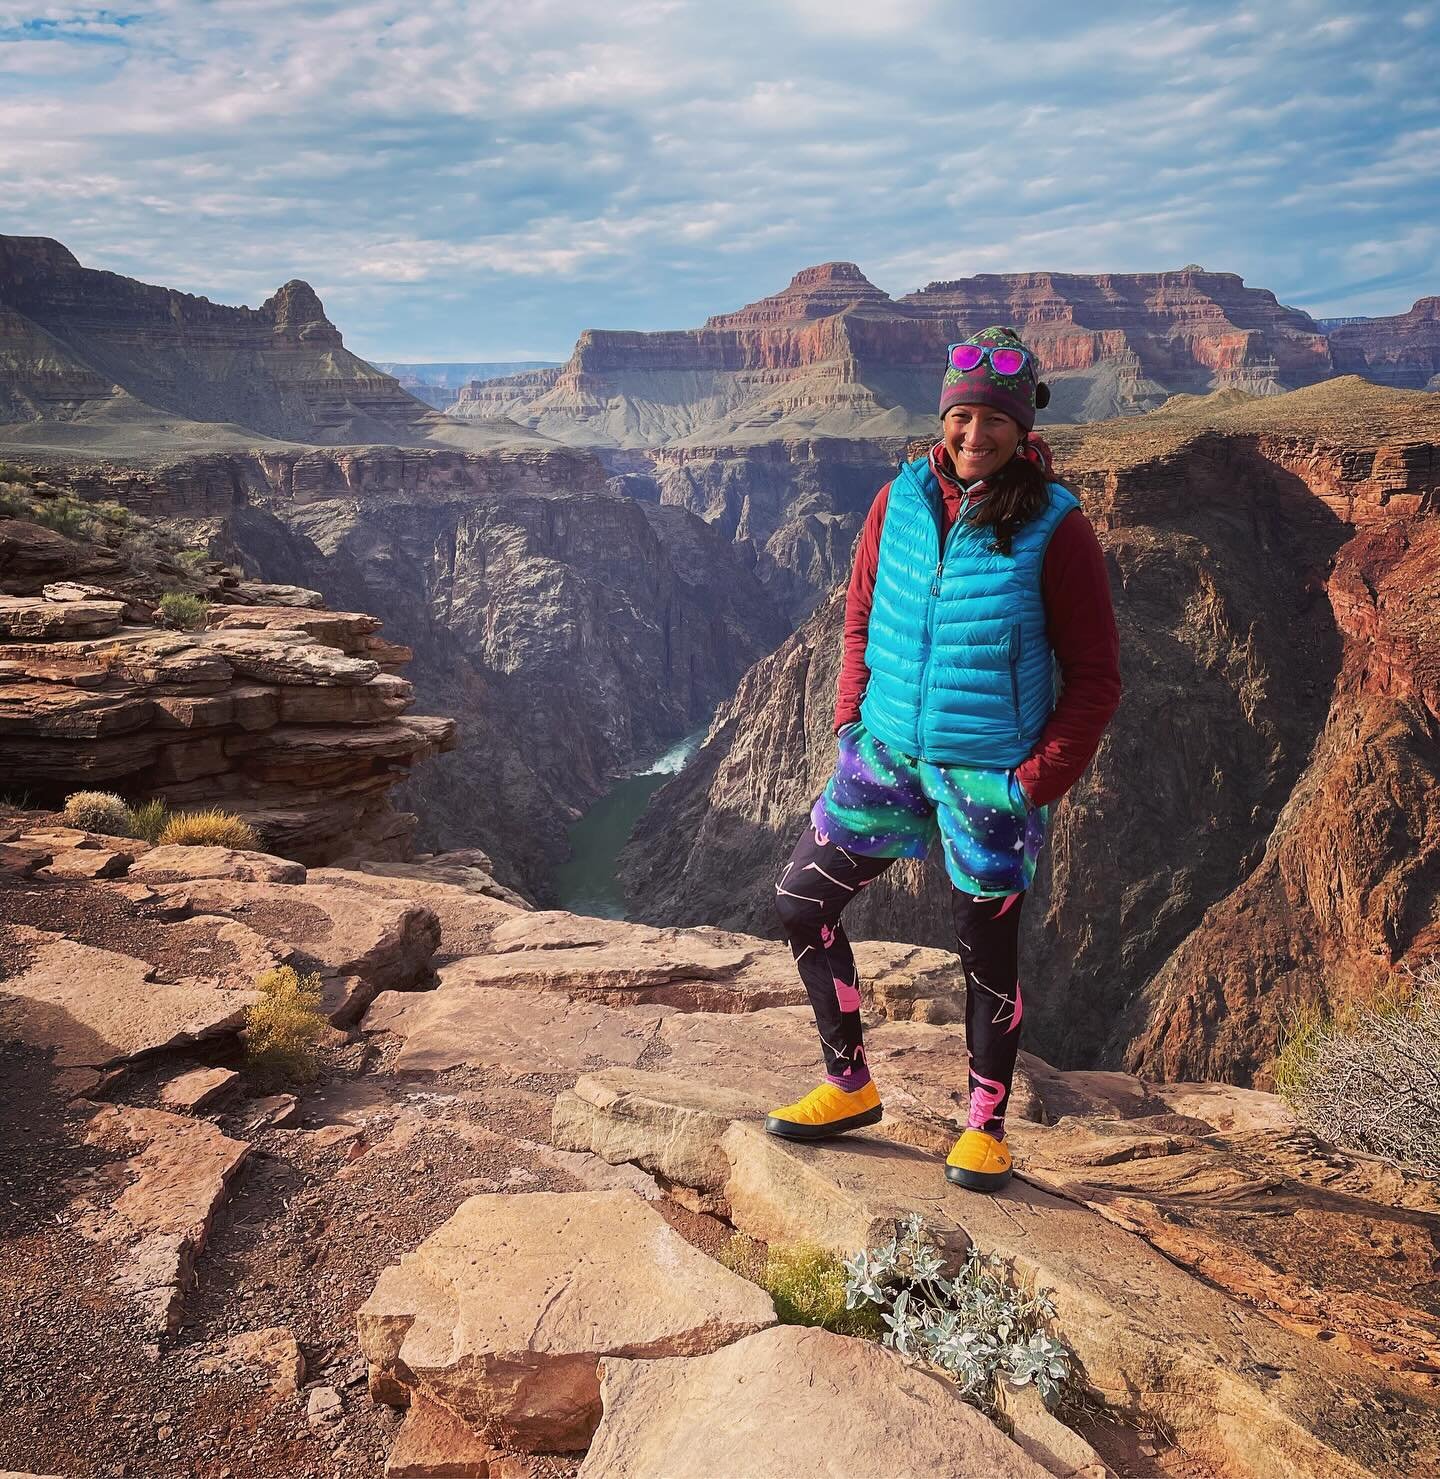 Hard to beat these weekend views! 

@mkg.rocks is always dressed for success when wearing FunLuvin&rsquo; Fleece! 

#funluvin #funluvinfleecewear #funluvinfleece #goingboating #rivertime #grandcanyon #weekendviews #coloradoriver #dressforsuccess #riv